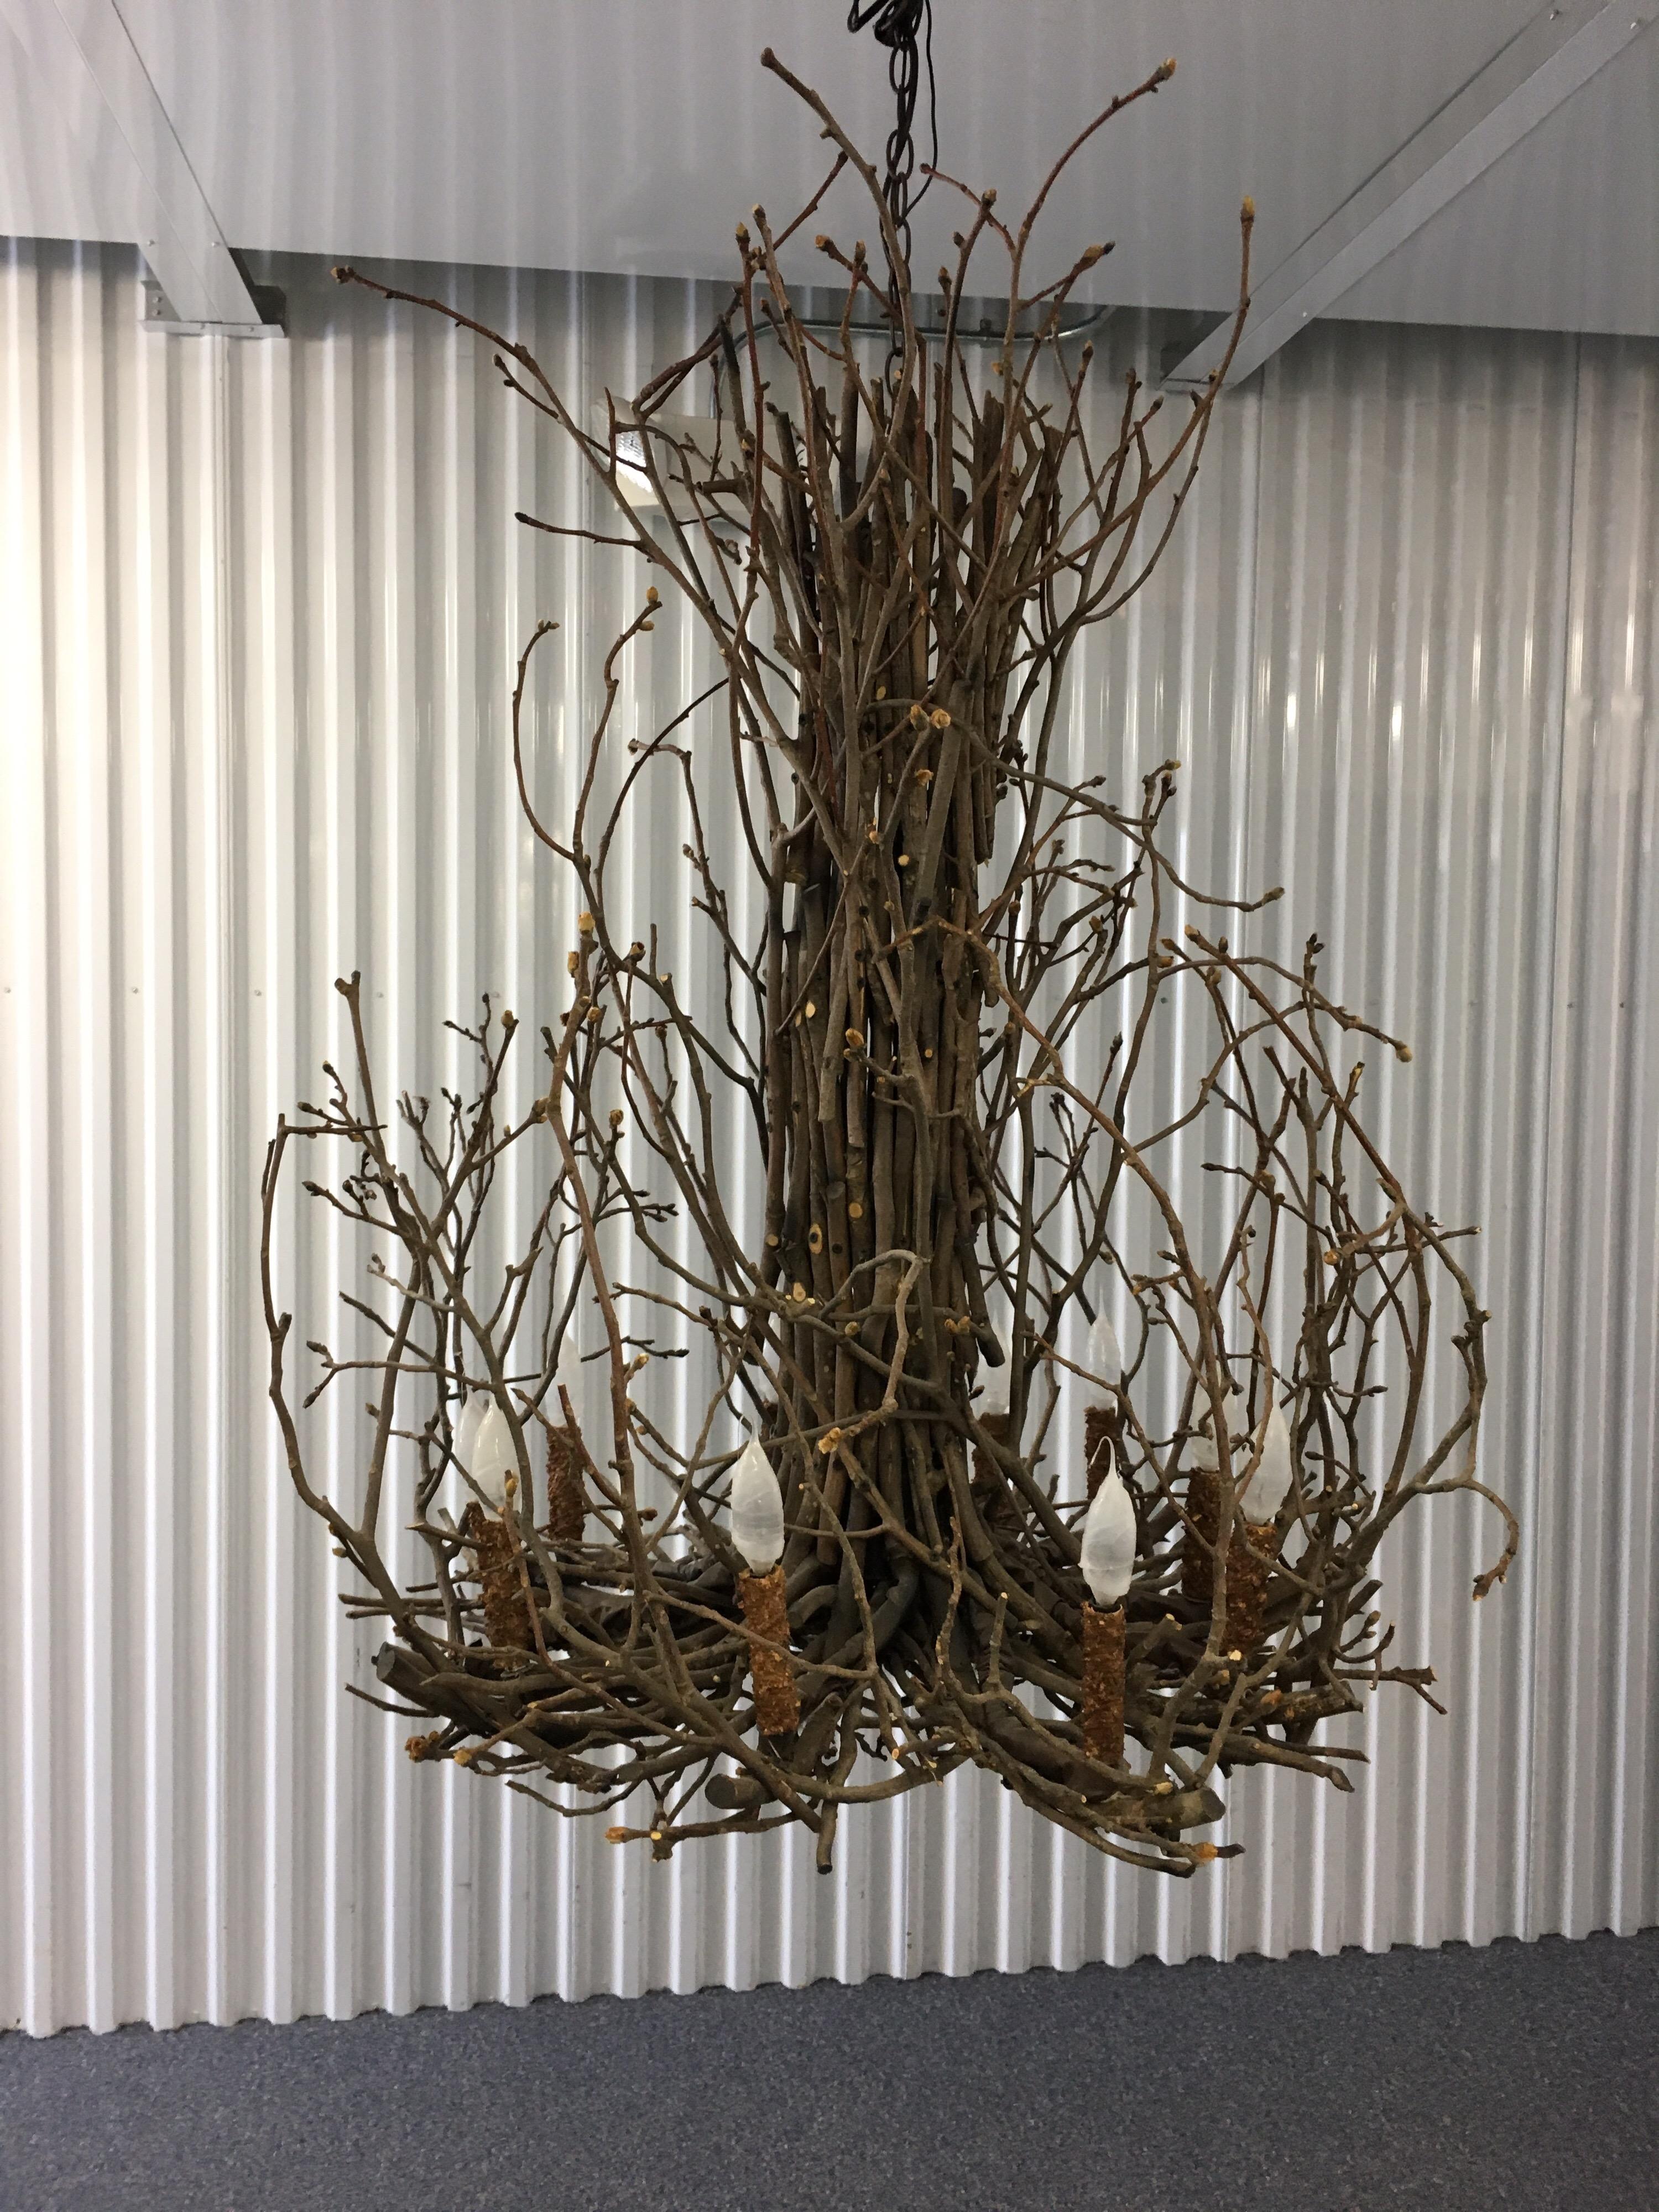 Willow twig branch eight-arm chandelier, handmade in Hudson, NY. Some breakage to some twig branches. Otherwise great centerpiece chandelier for a rustic look.
Measures: 47